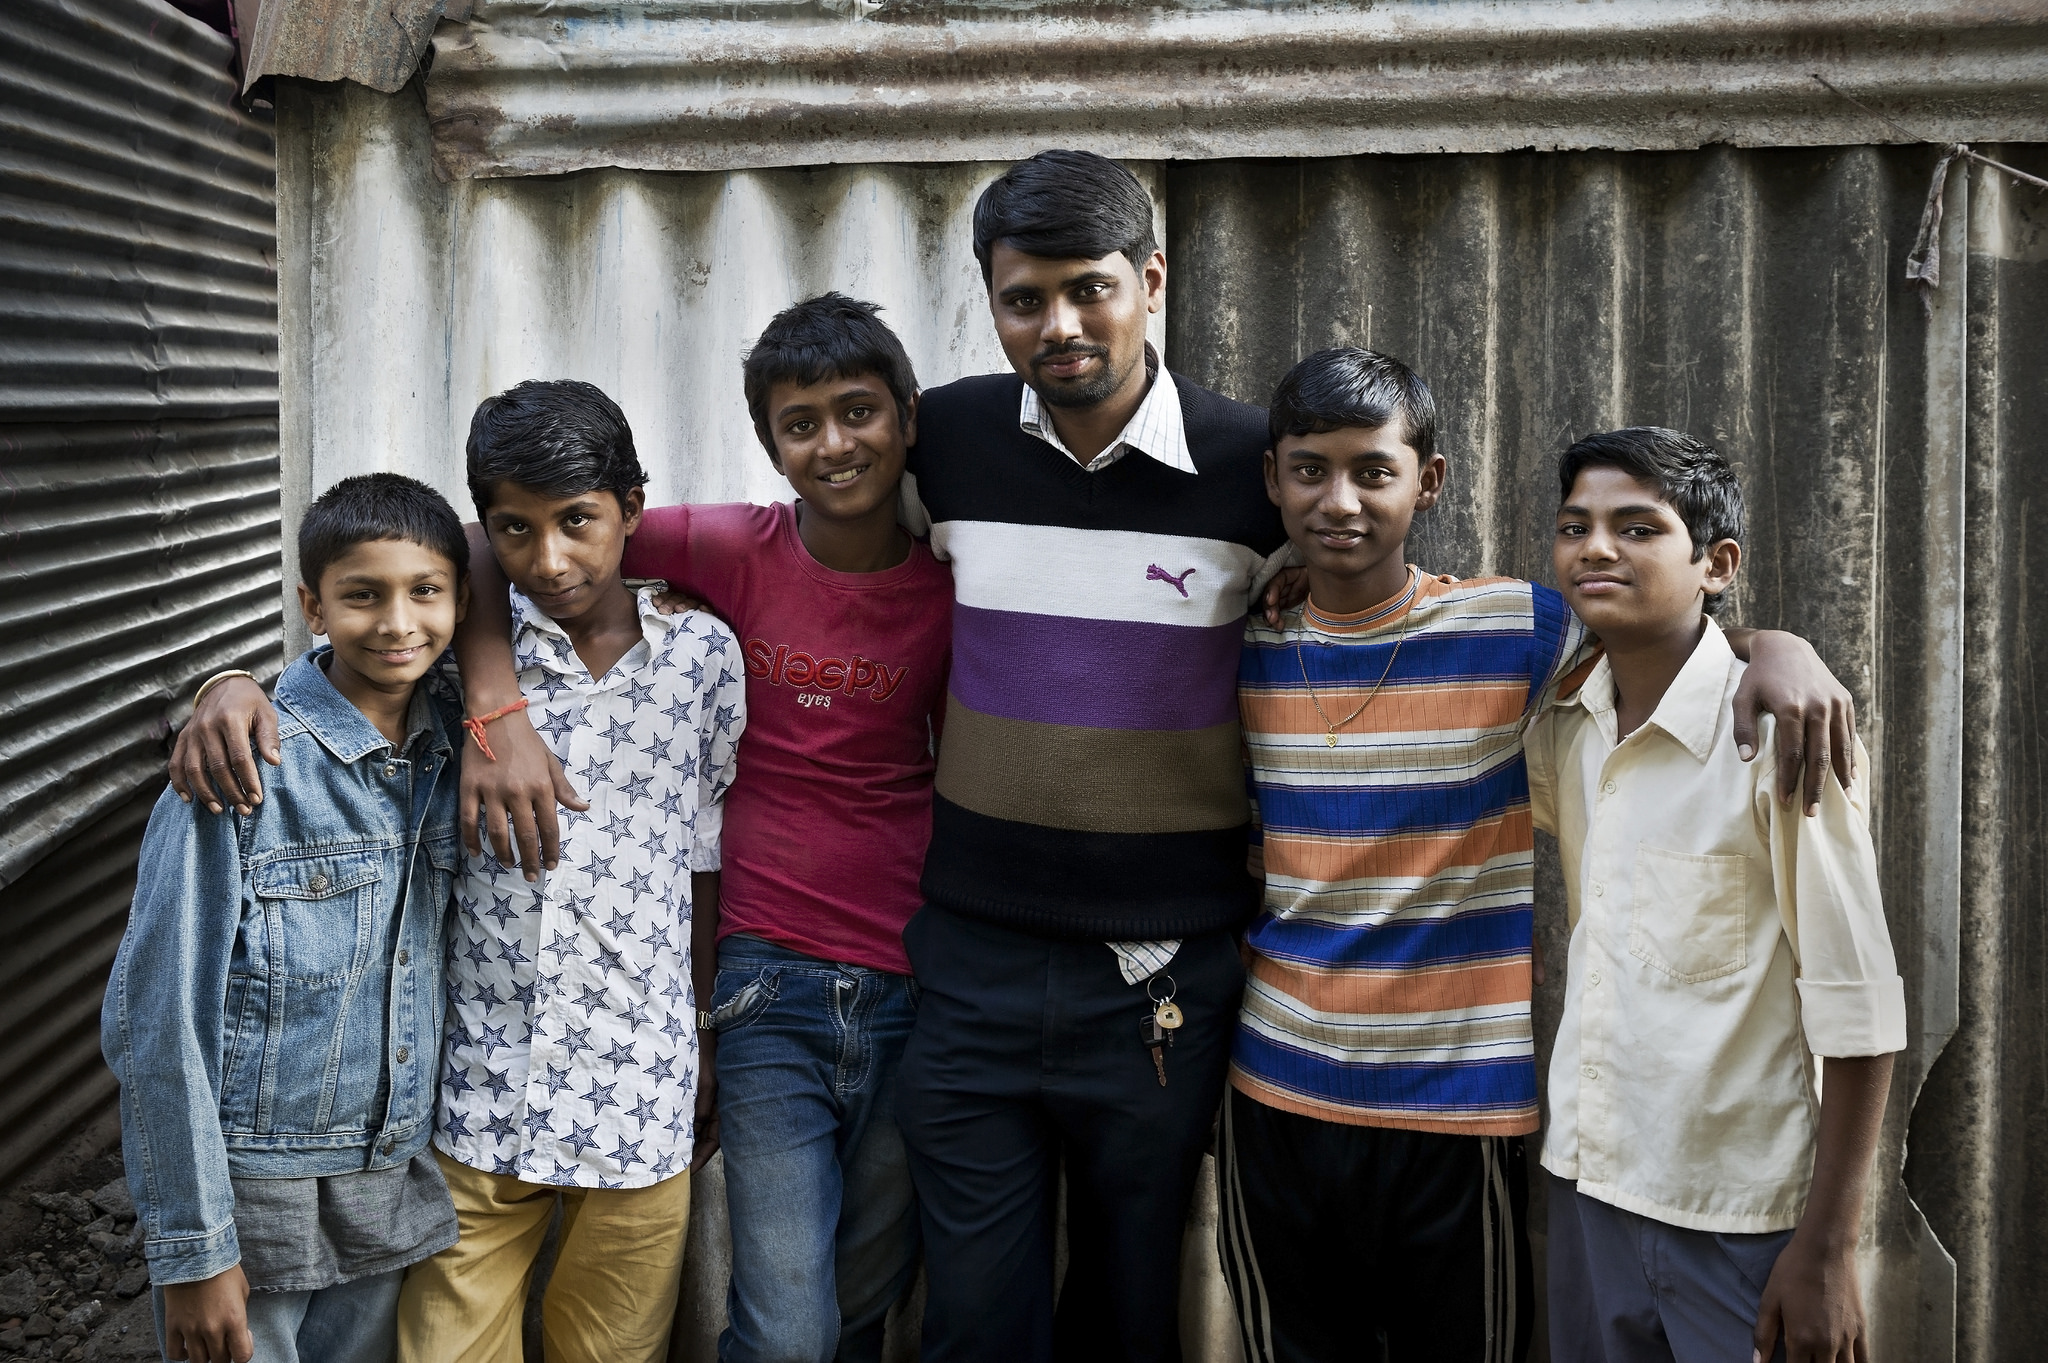 group of a young boys - masculinity in India